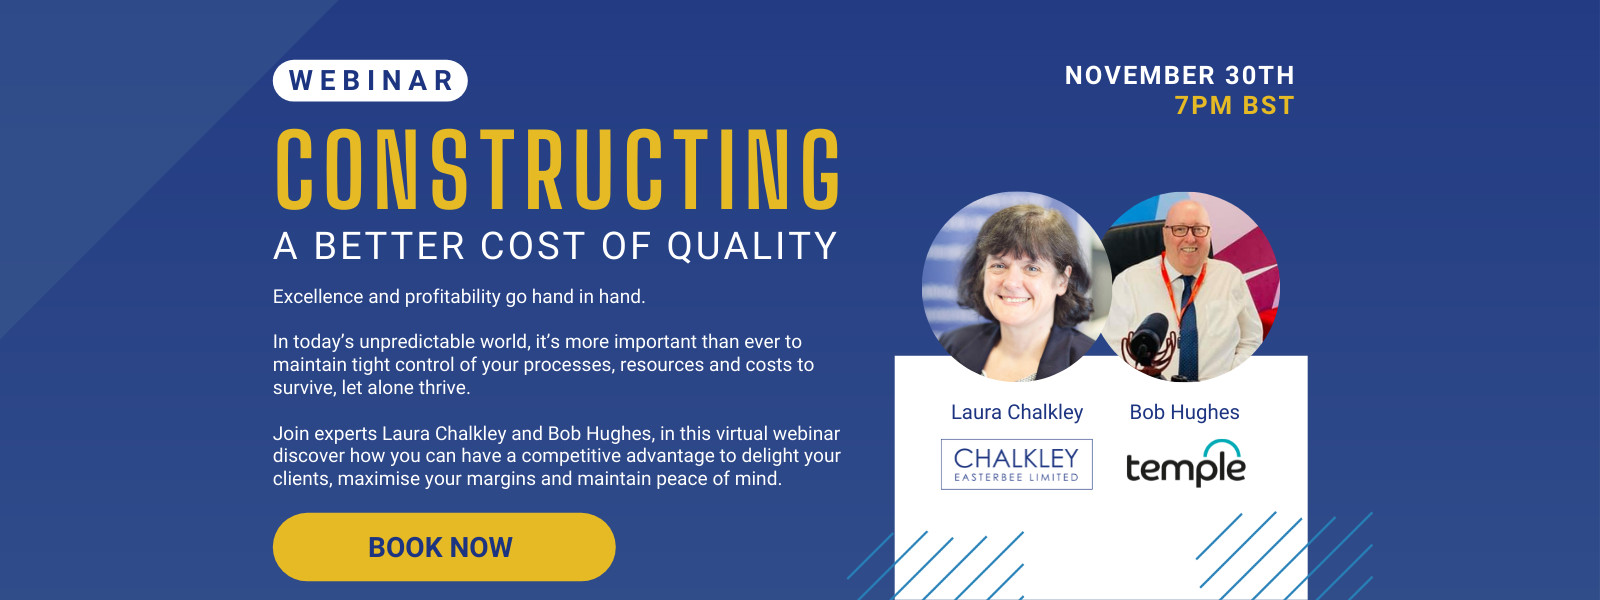 Book Your Free Place: Constructing A Better Cost Of Quality - Nov 30th 7pm